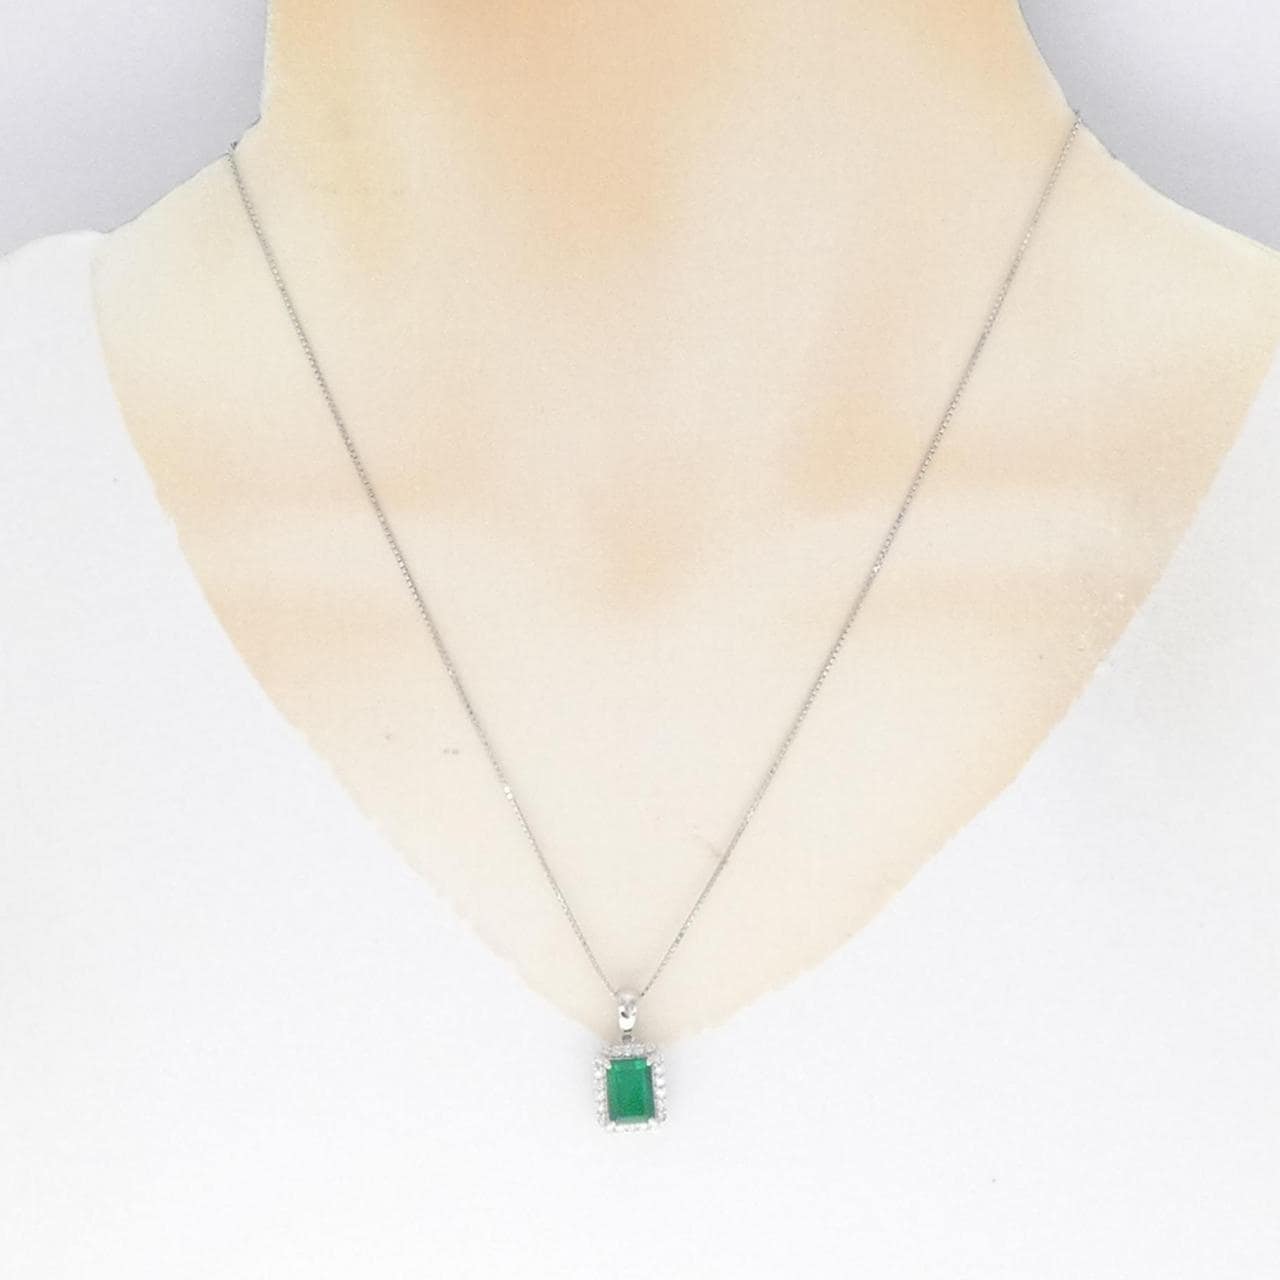 [Remake] PT Emerald Necklace 2.22CT Made in Colombia